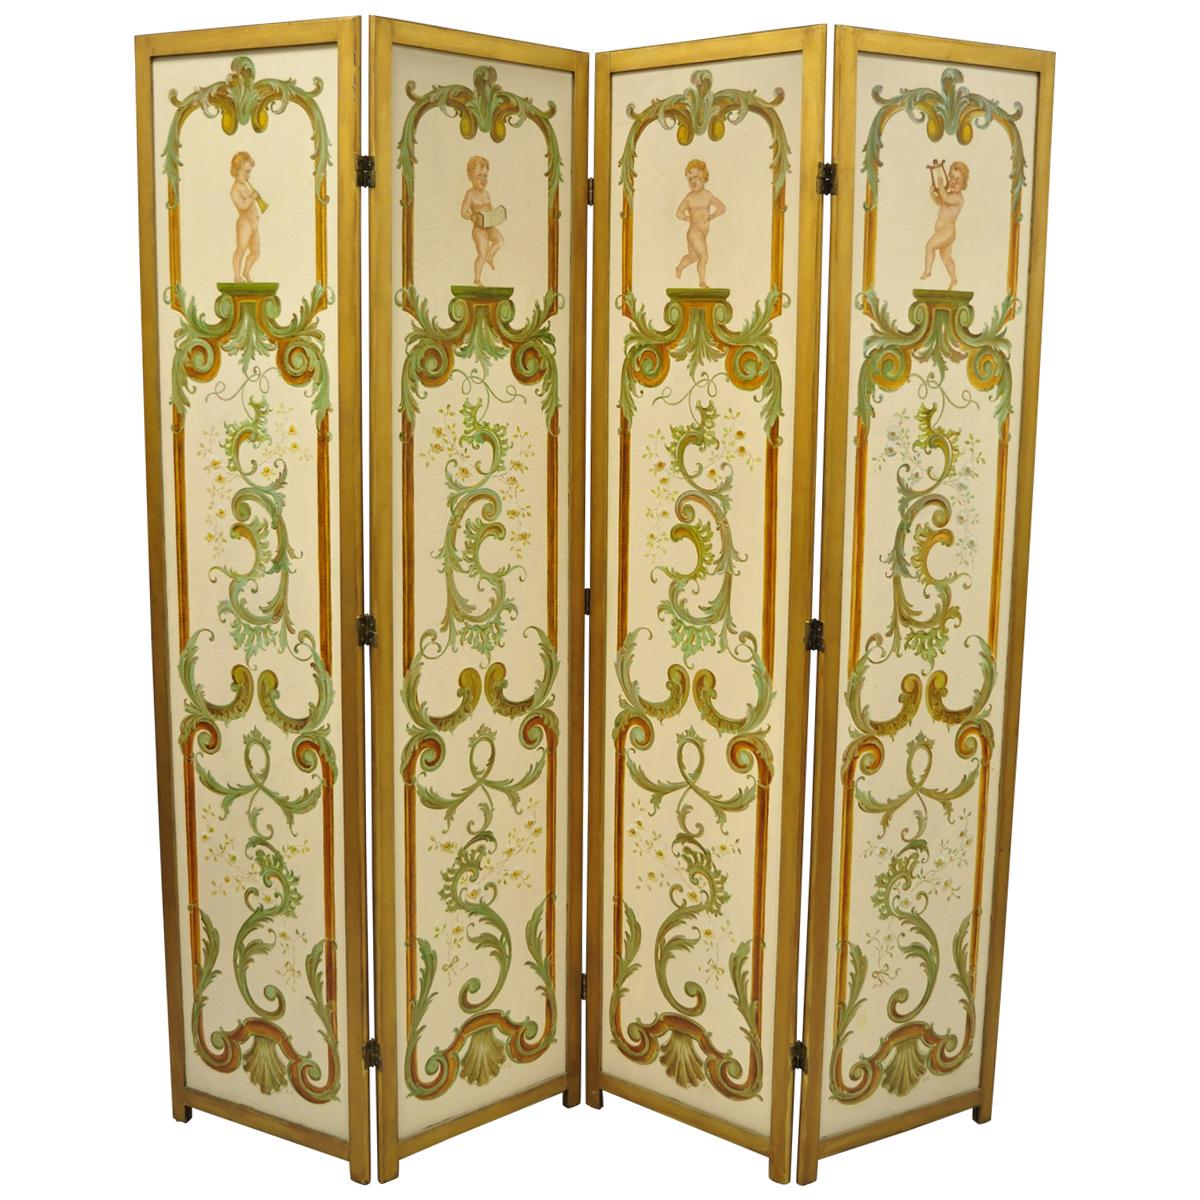 Four Panel Hand Painted French Cherub Putti Musical Dressing Screen Room Divider